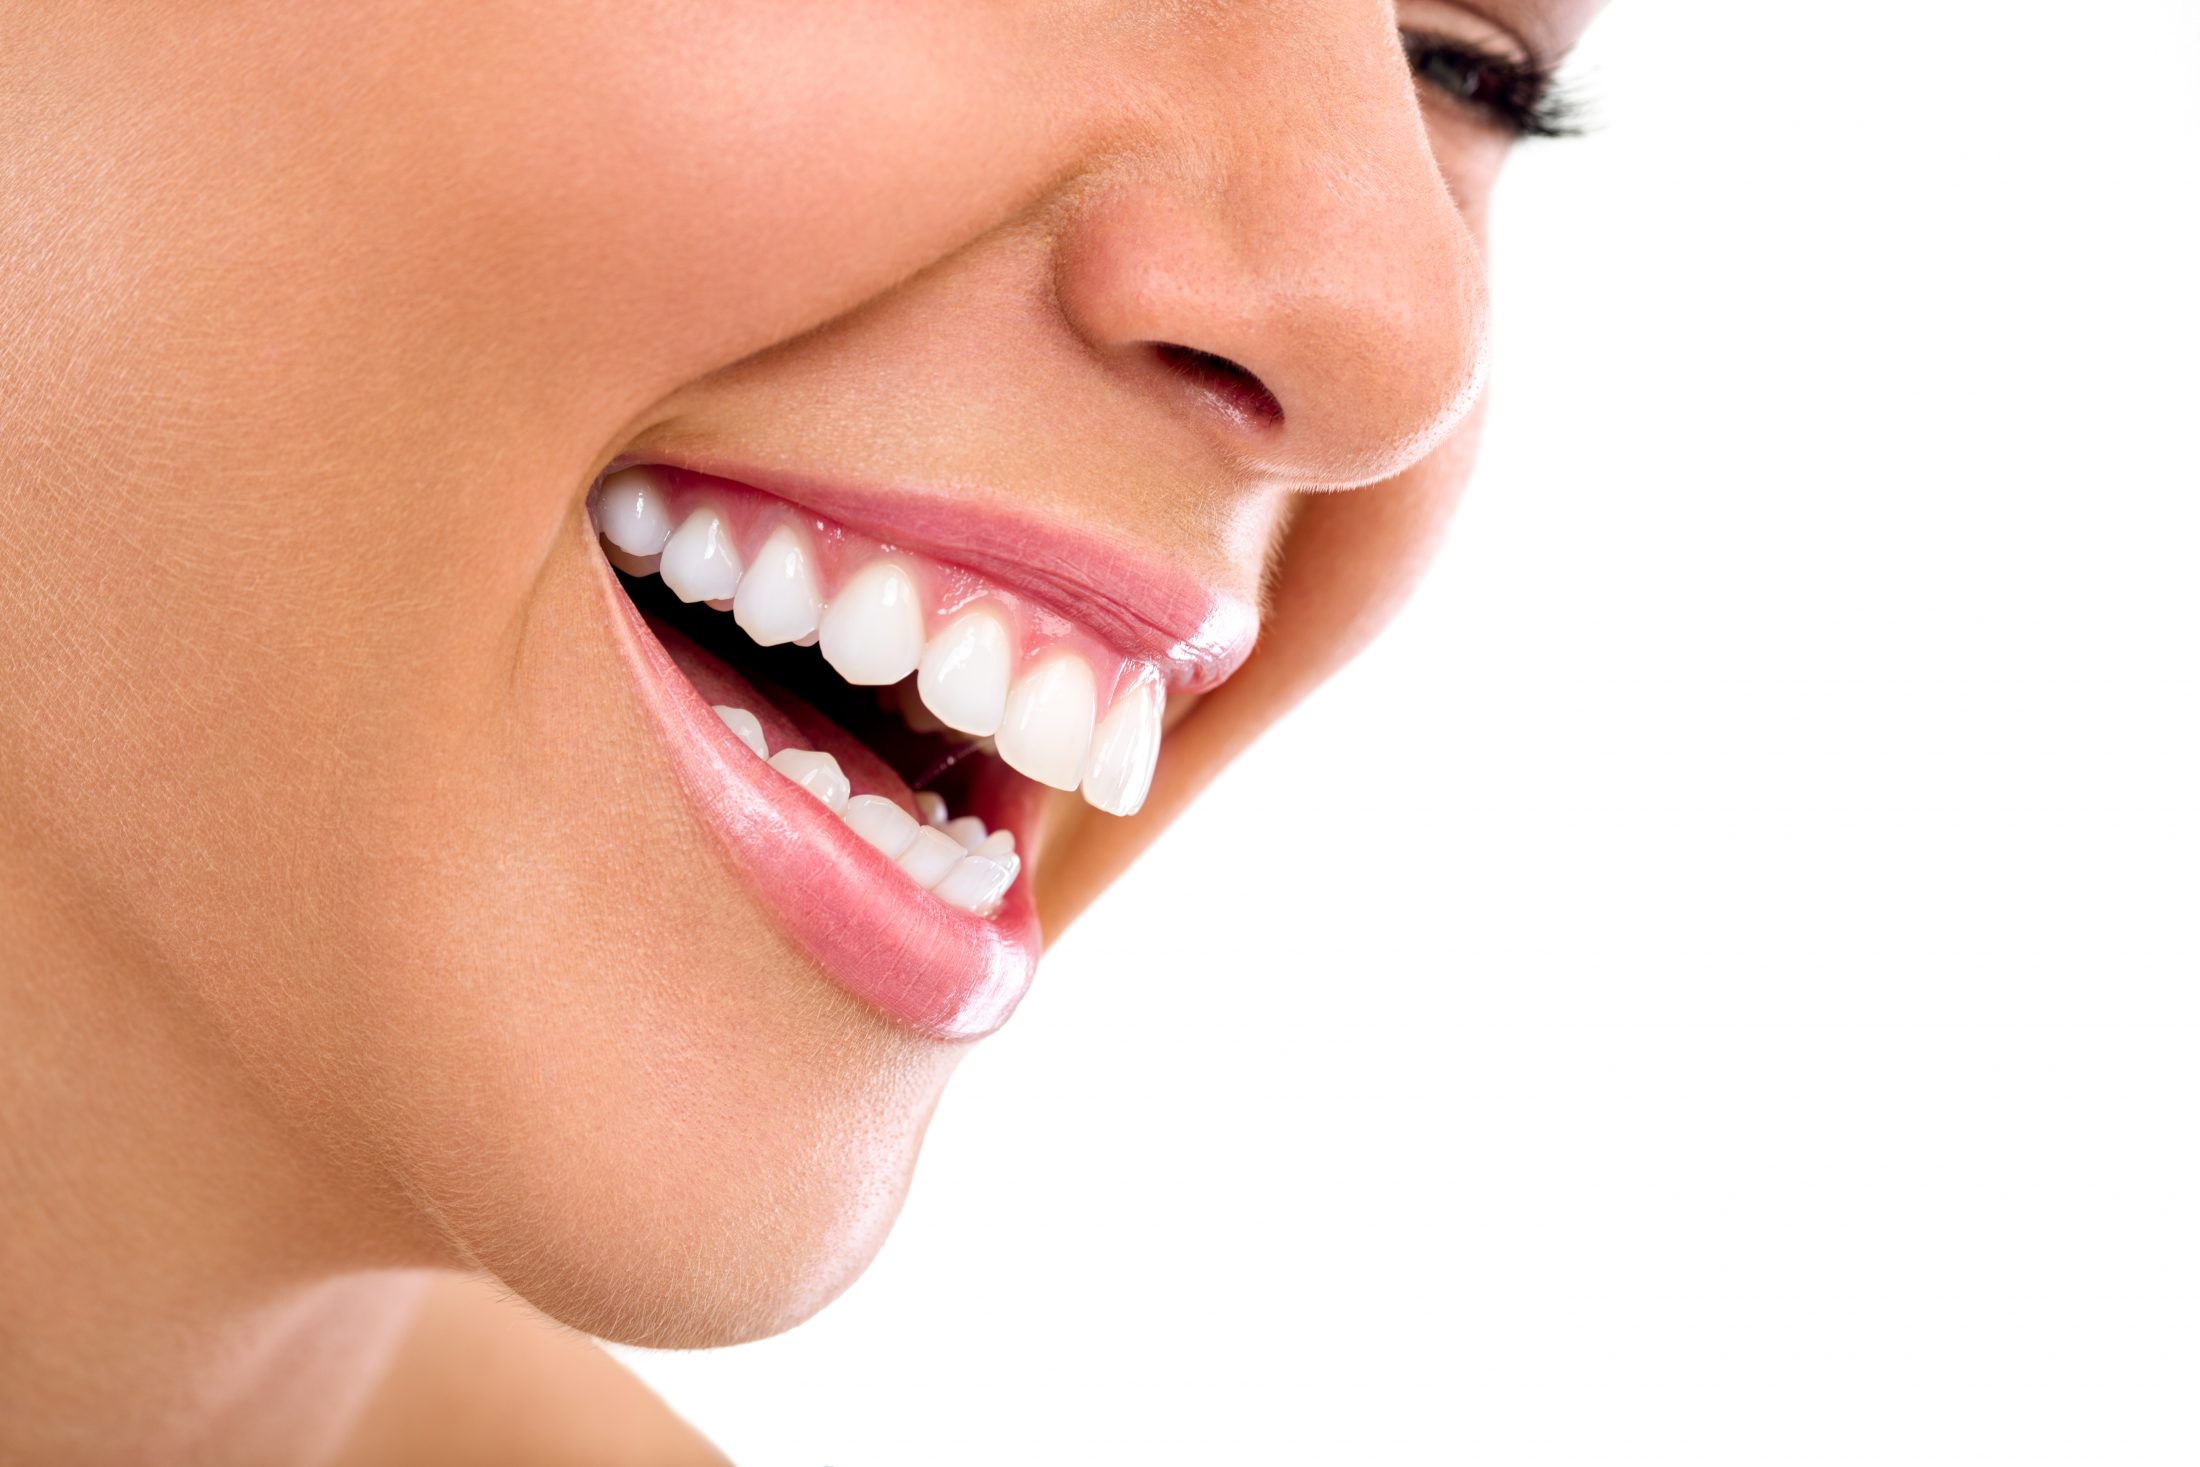 Teeth Whitening: an easy way to transform your smile.